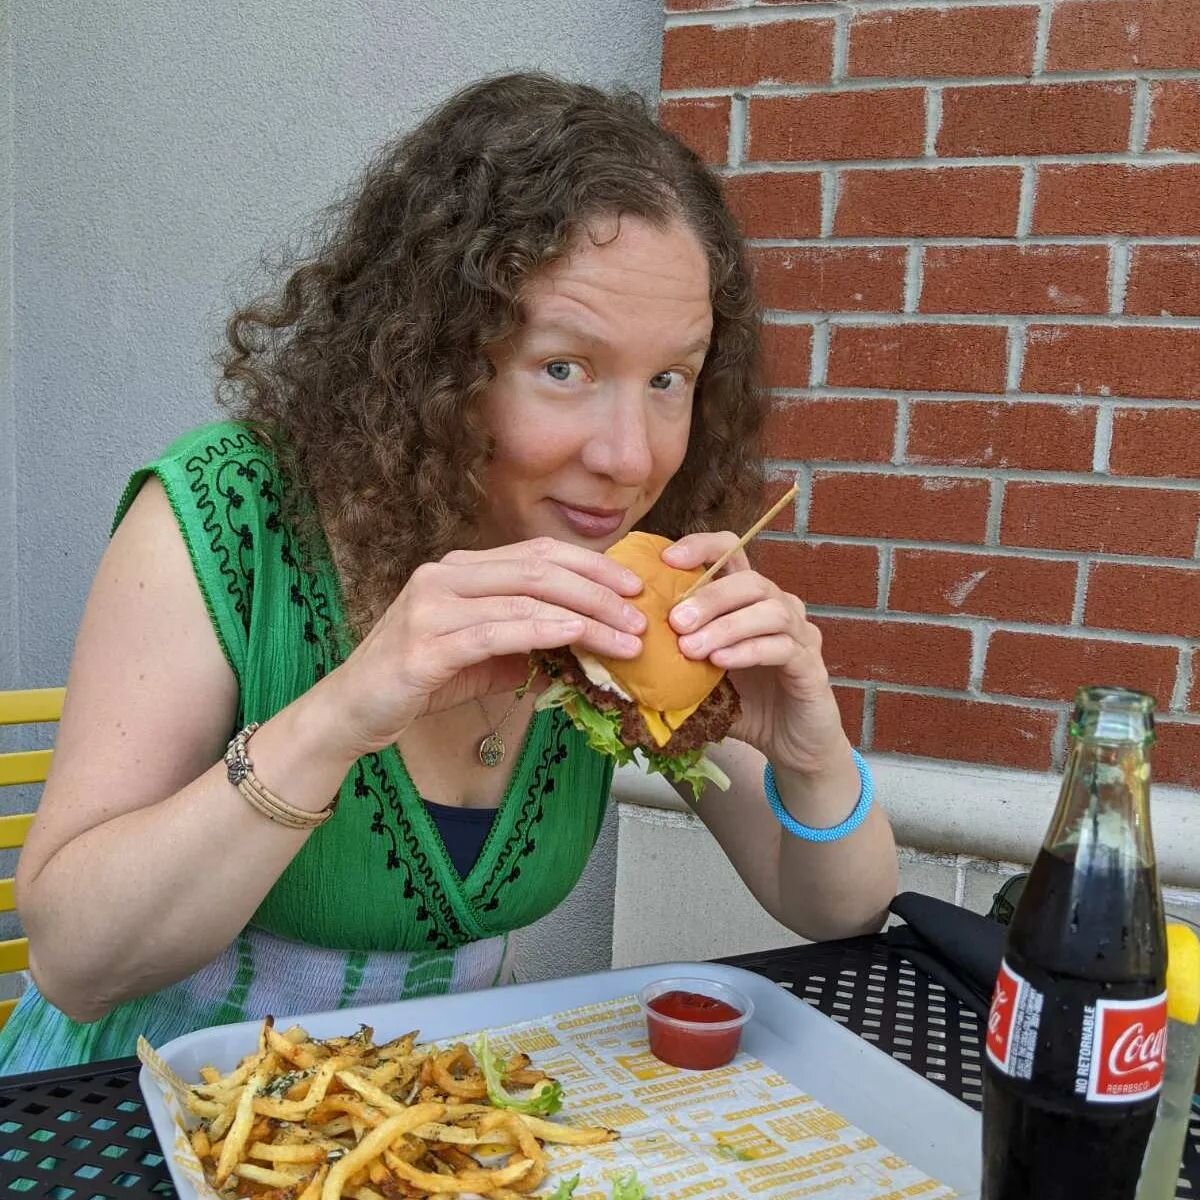 Delicious Birthday Cheeseburger by @burghersbrewingpgh was the perfect dinner!! 😀🍔✨
.
#cheeseburger #birthday #impossibleburger #happyplace #burghersbrewingzelienople